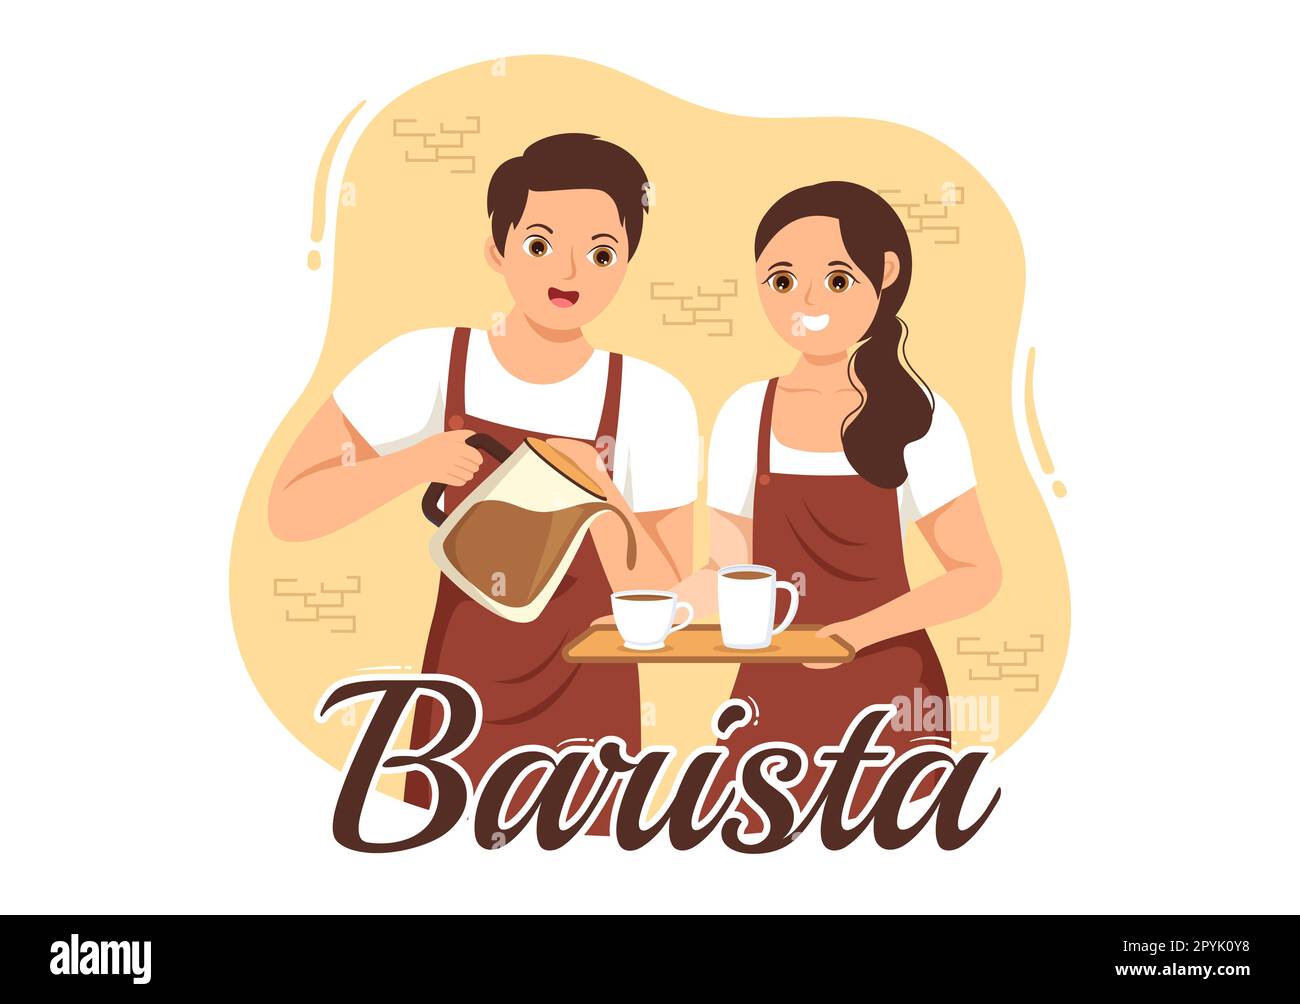 Barista Illustration With Wearing Standing Apron Making Coffee for Customer in Flat Cartoon Hand Drawn Landing Page or Web Banner Template Stock Photo